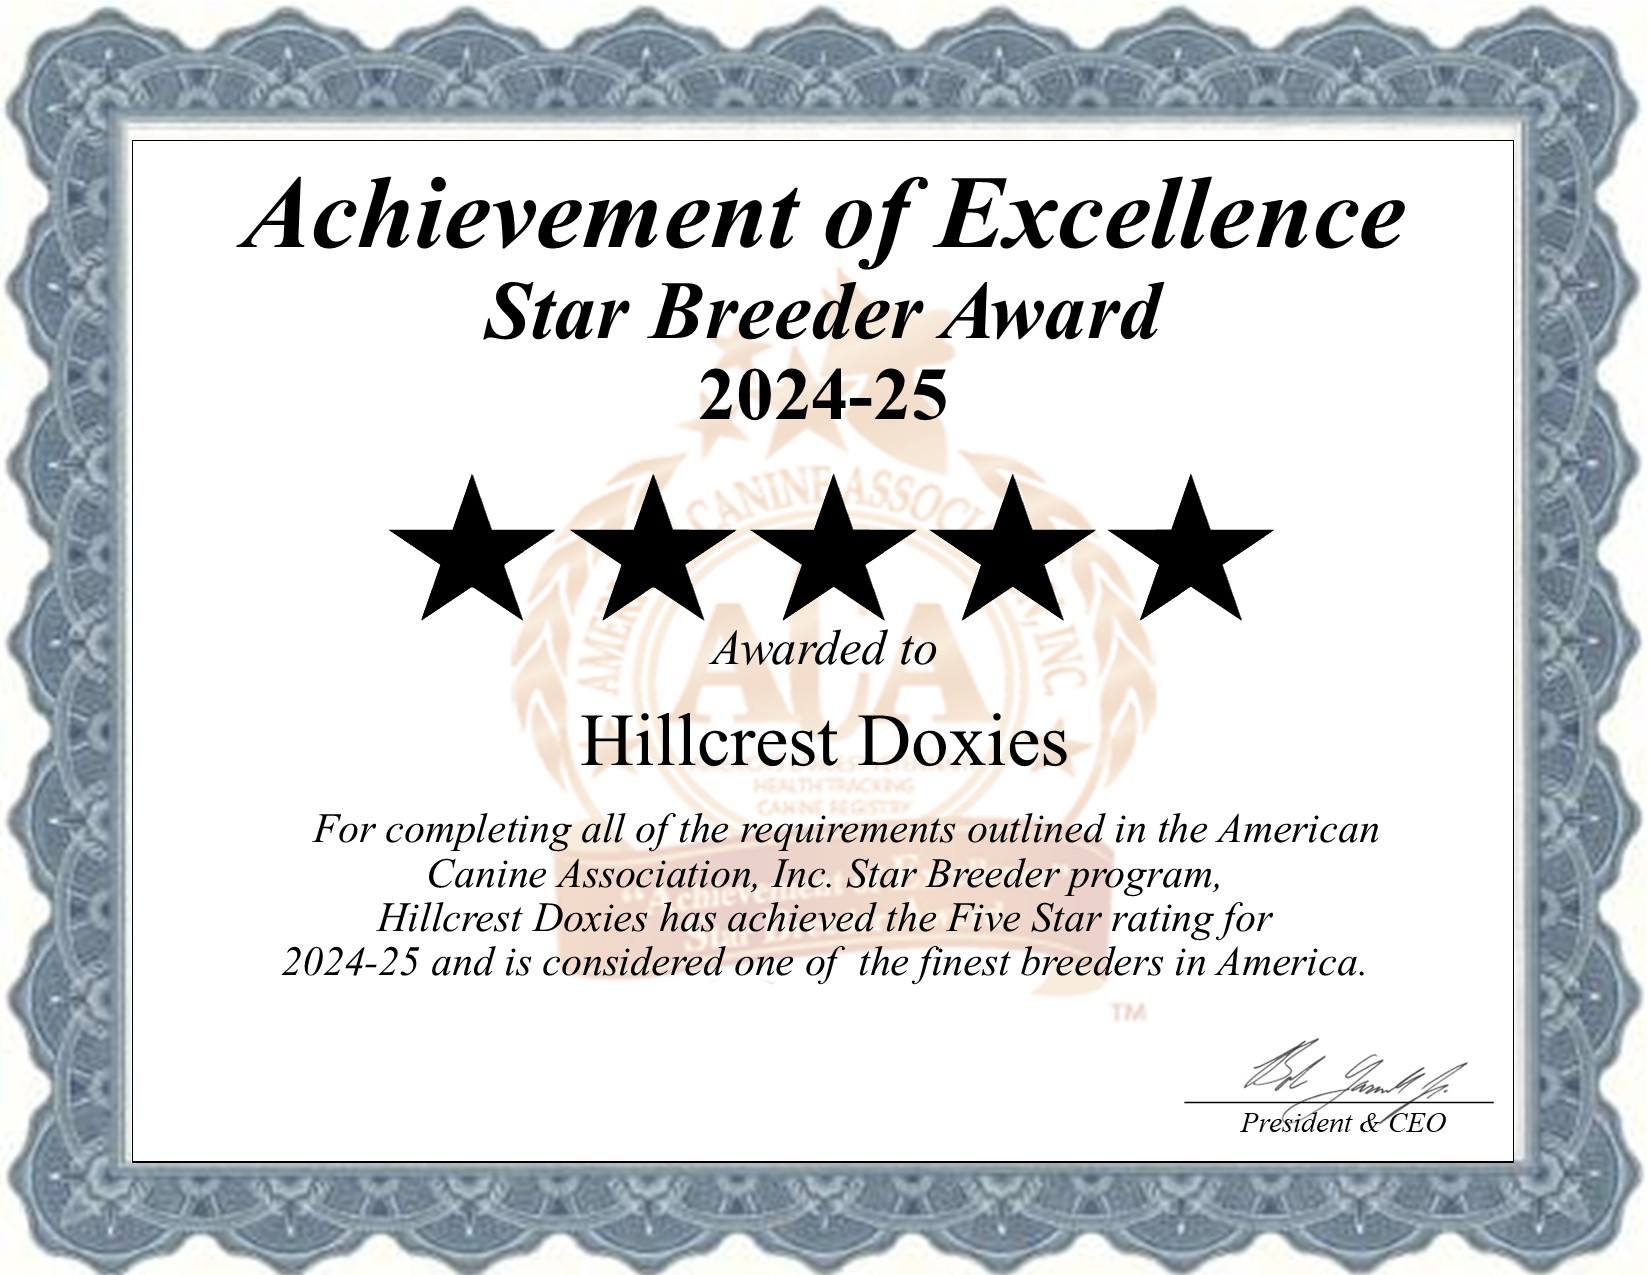 Hillcrest, Doxies, dog, breeder, star, certificate, Hillcrest-Doxies, Wolcott, NY, New York, puppy, dog, kennels, mill, puppymill, usda, 5-star, aca, ica, registered, Dachshunds, 21-A-0229, 21A0229